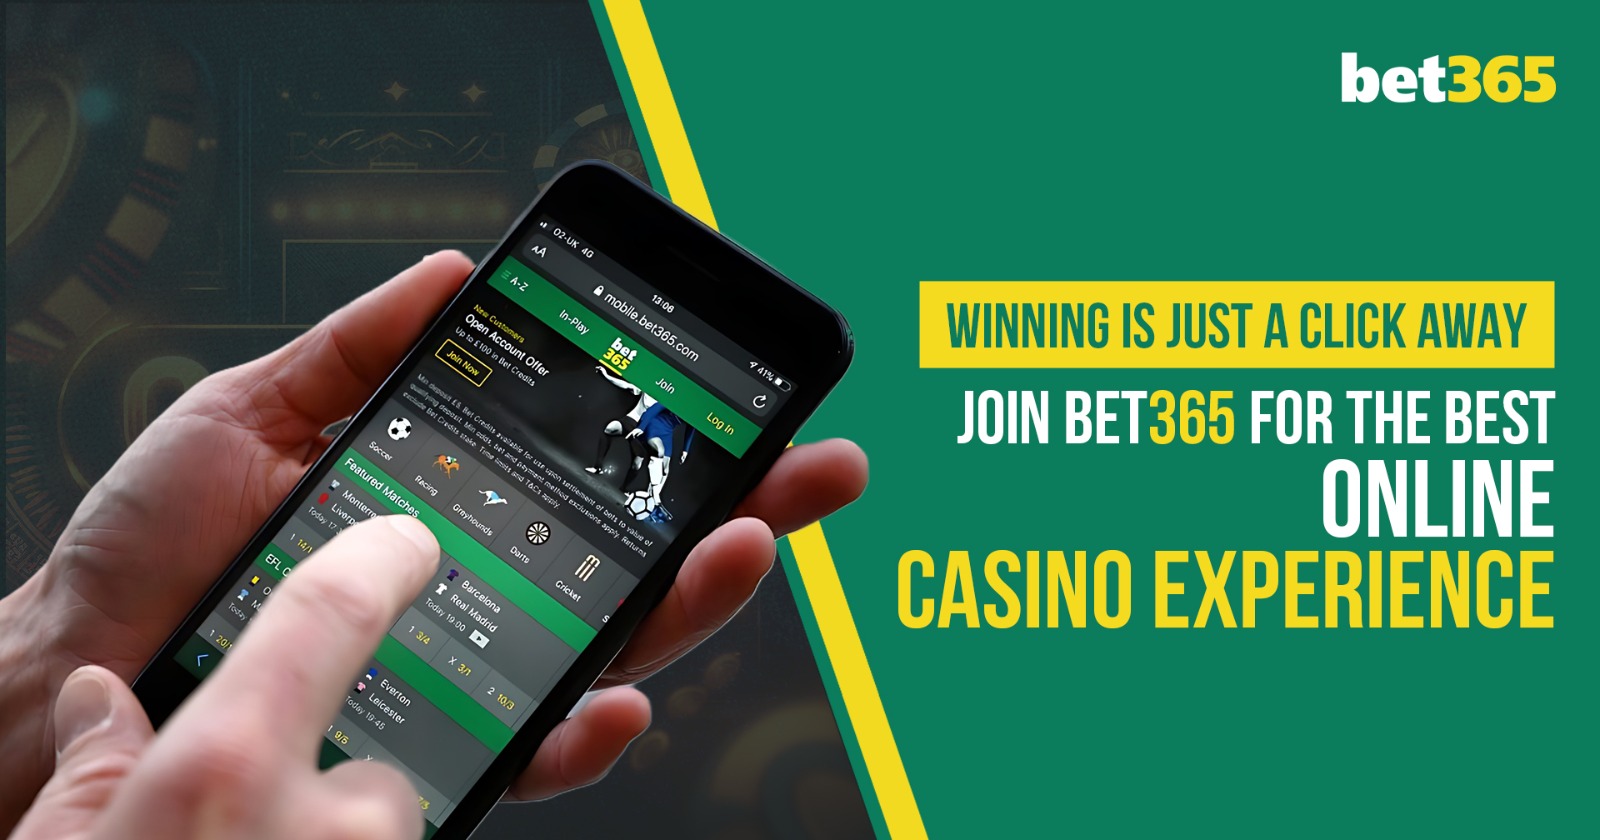 Winning is Just a Click Away: Join Bet365 for the Best Online Casino Experience